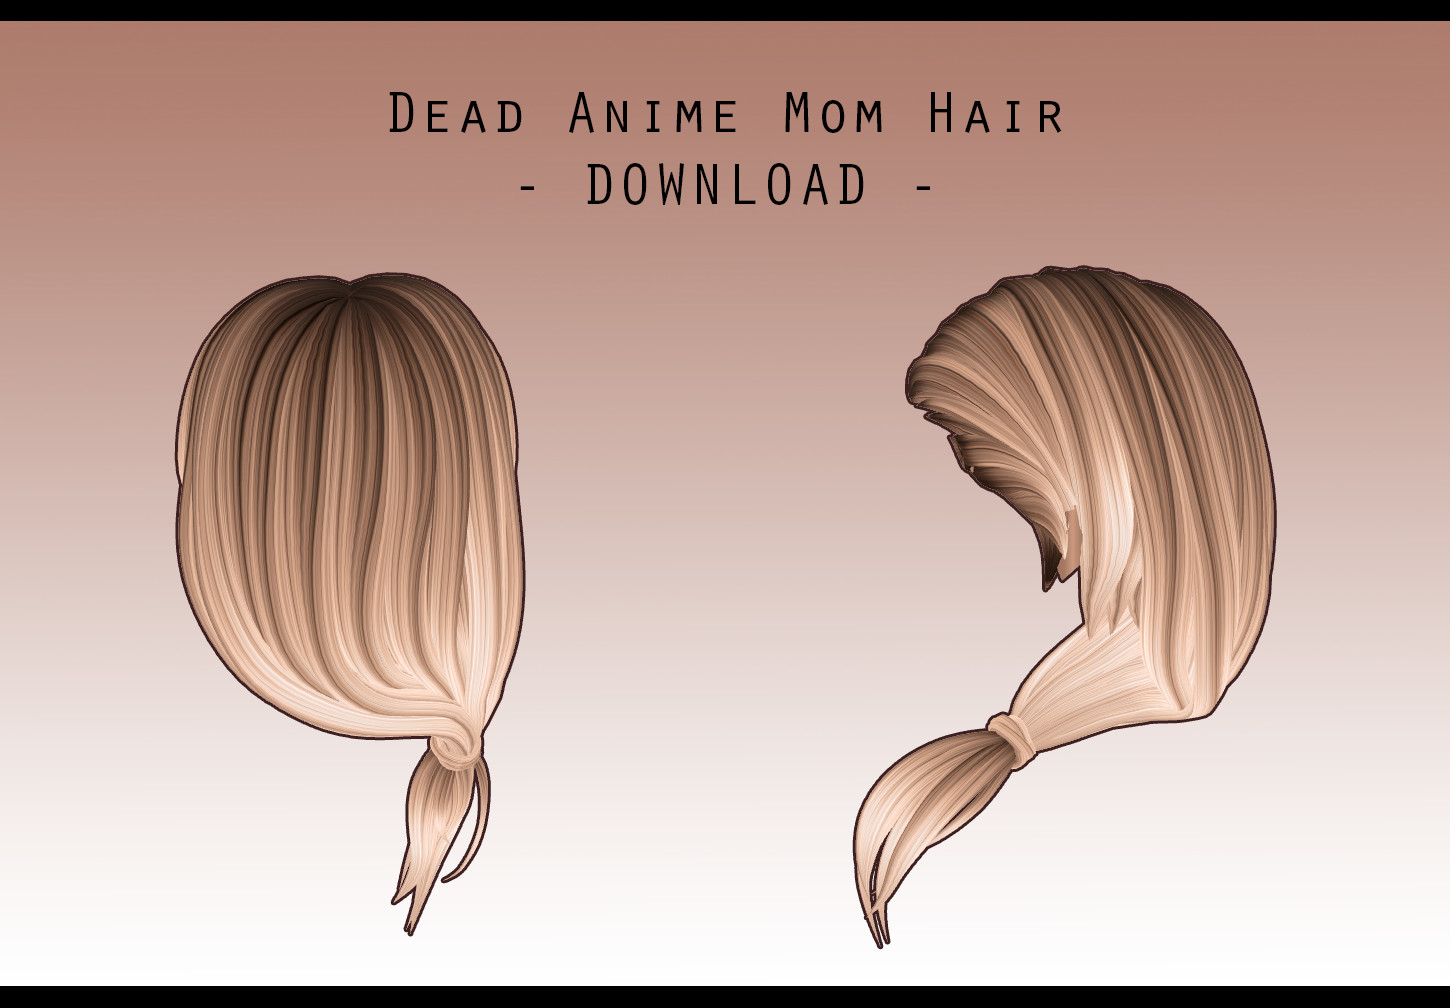 Anime Mom Hairstyle
 Dead Anime Mom back Hair [ DOWNLOAD ] by avant garde on